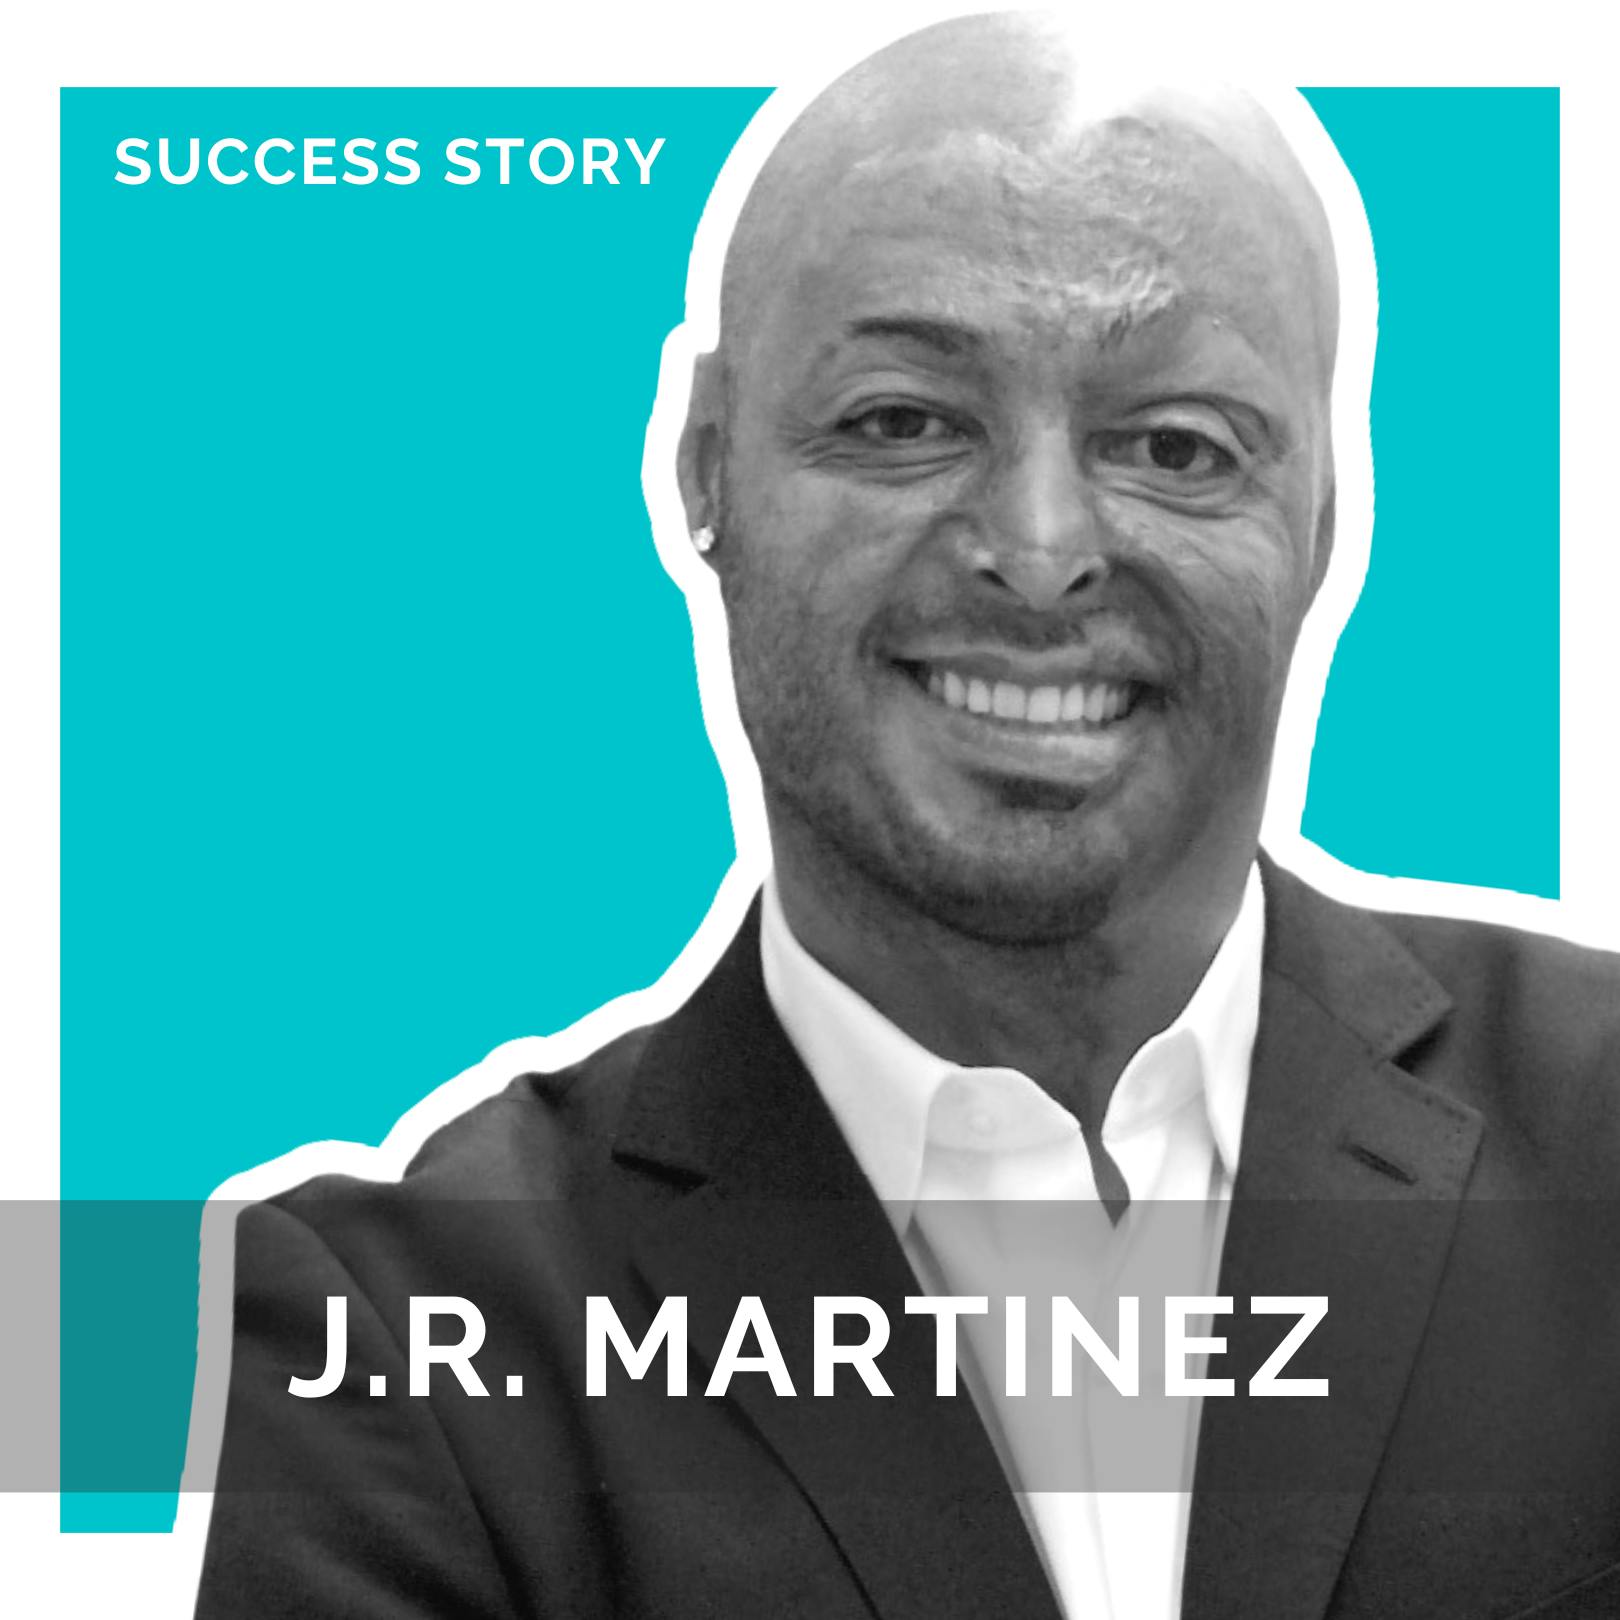 J.R. Martinez - Bestselling Author, Speaker, Veteran & Actor | How to Adapt and Overcome